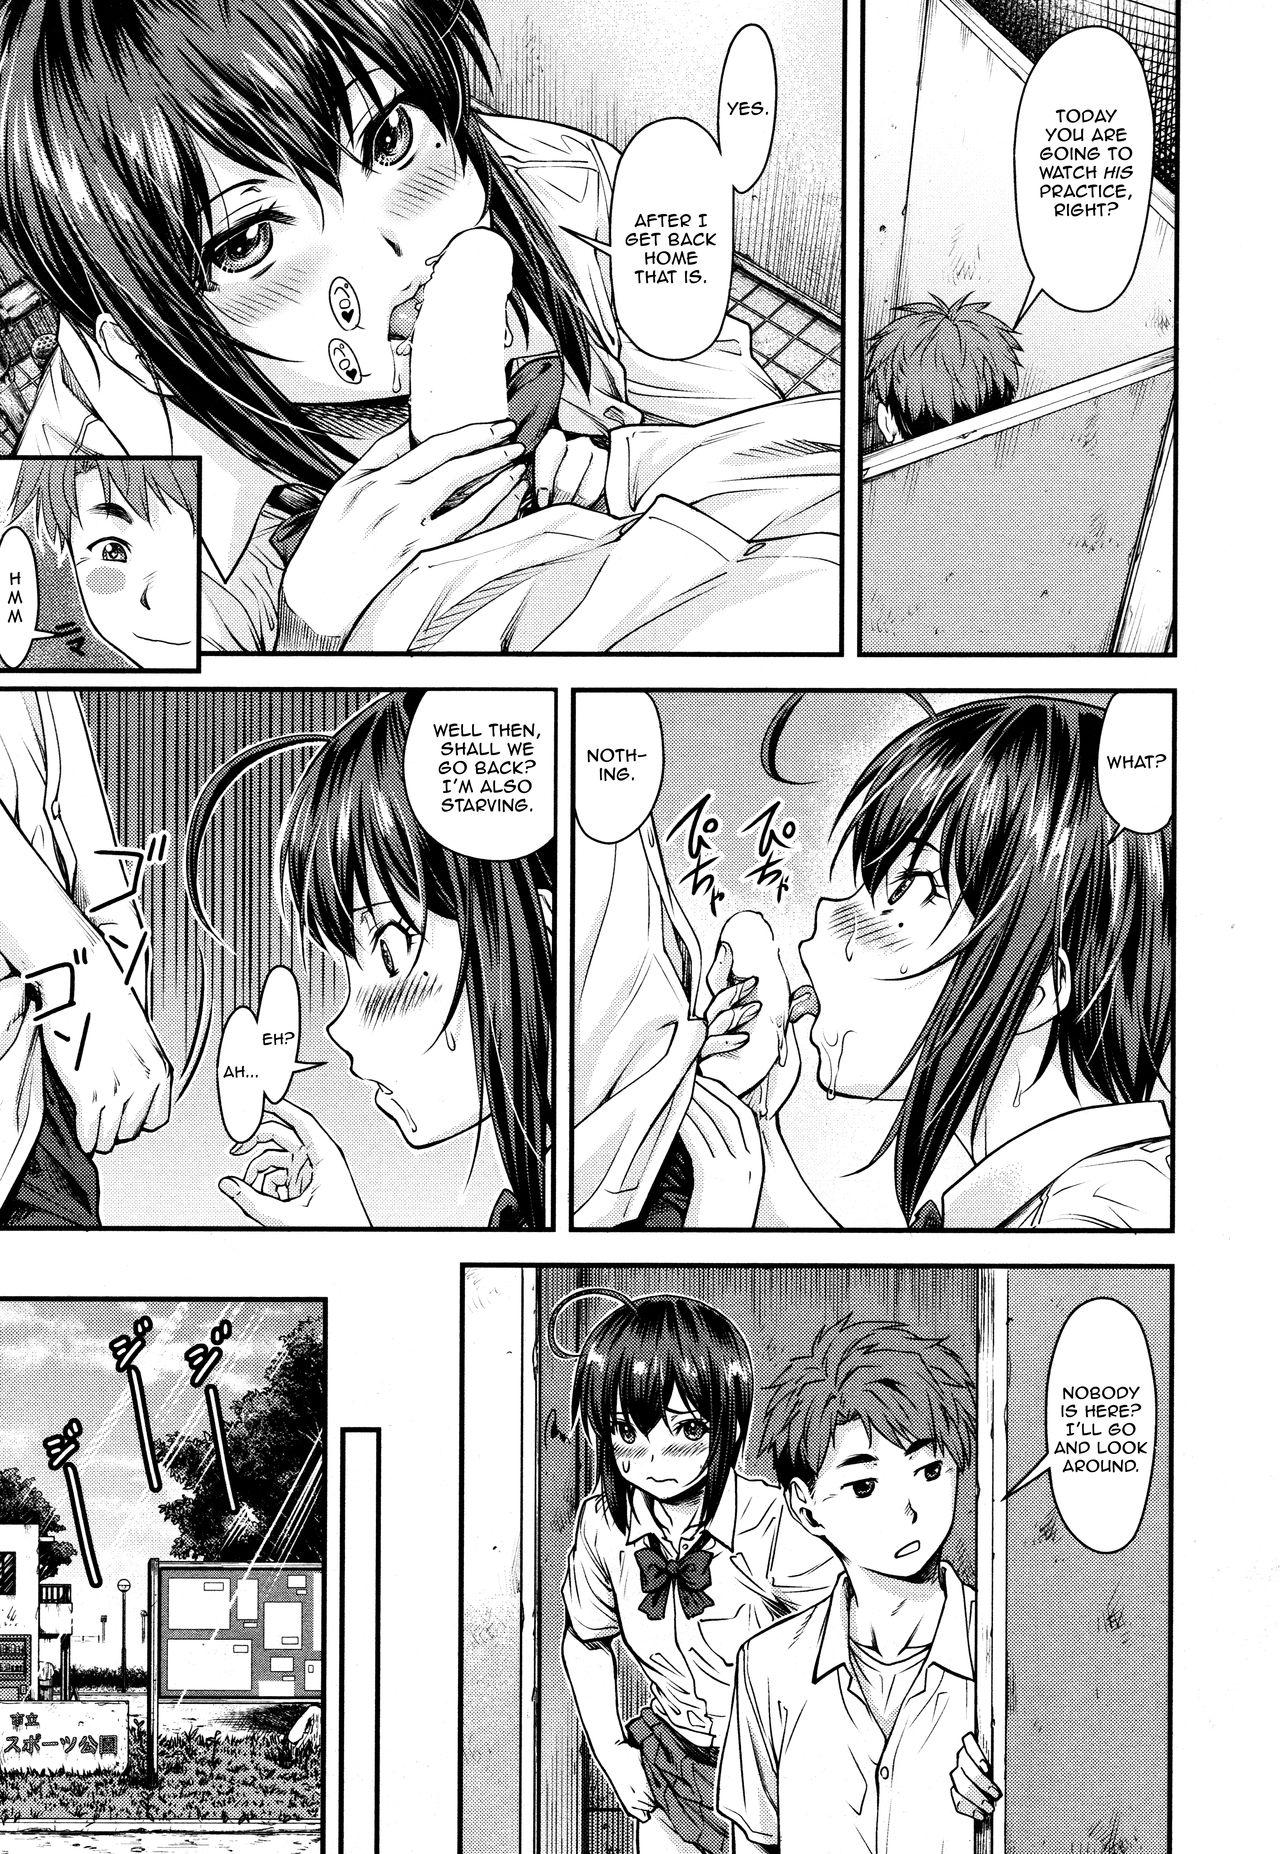 Sexy Girl Kaname Date #10 Blowjobs - Page 5